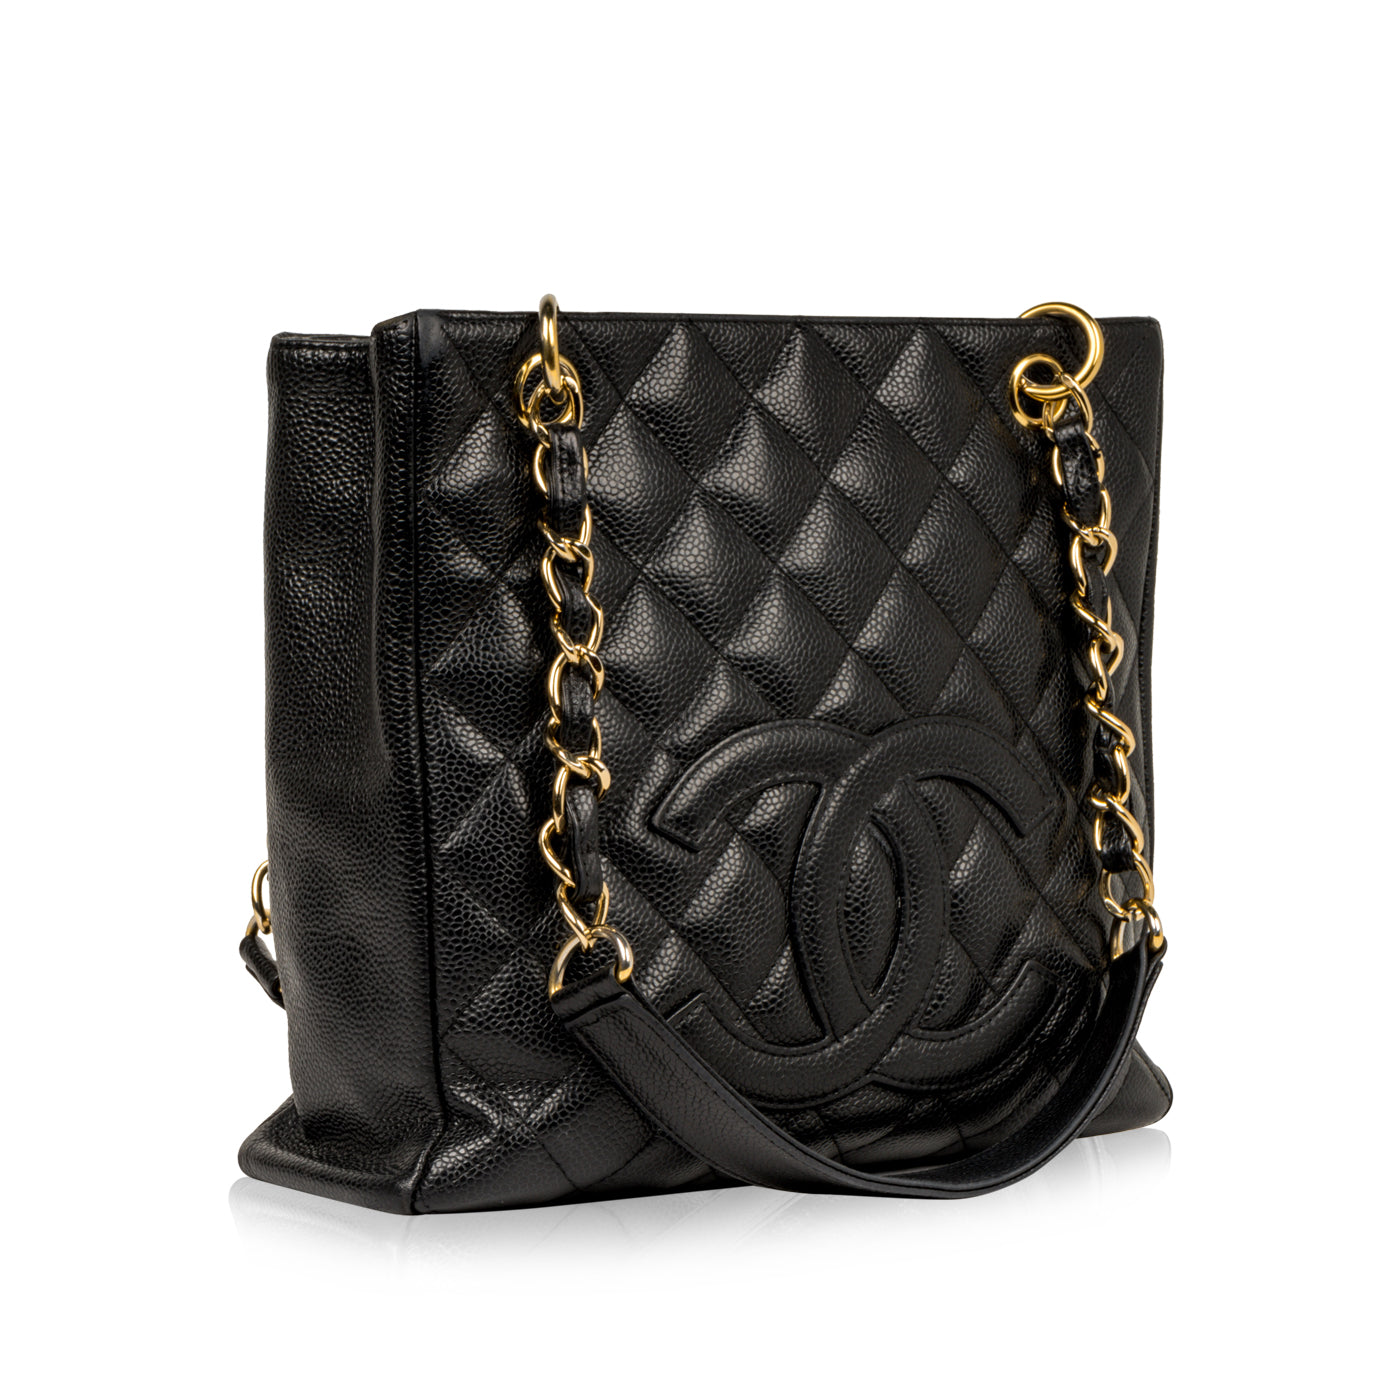 Chanel Black Quilted Caviar Leather Petite Timeless Shopper Tote Chanel   TLC